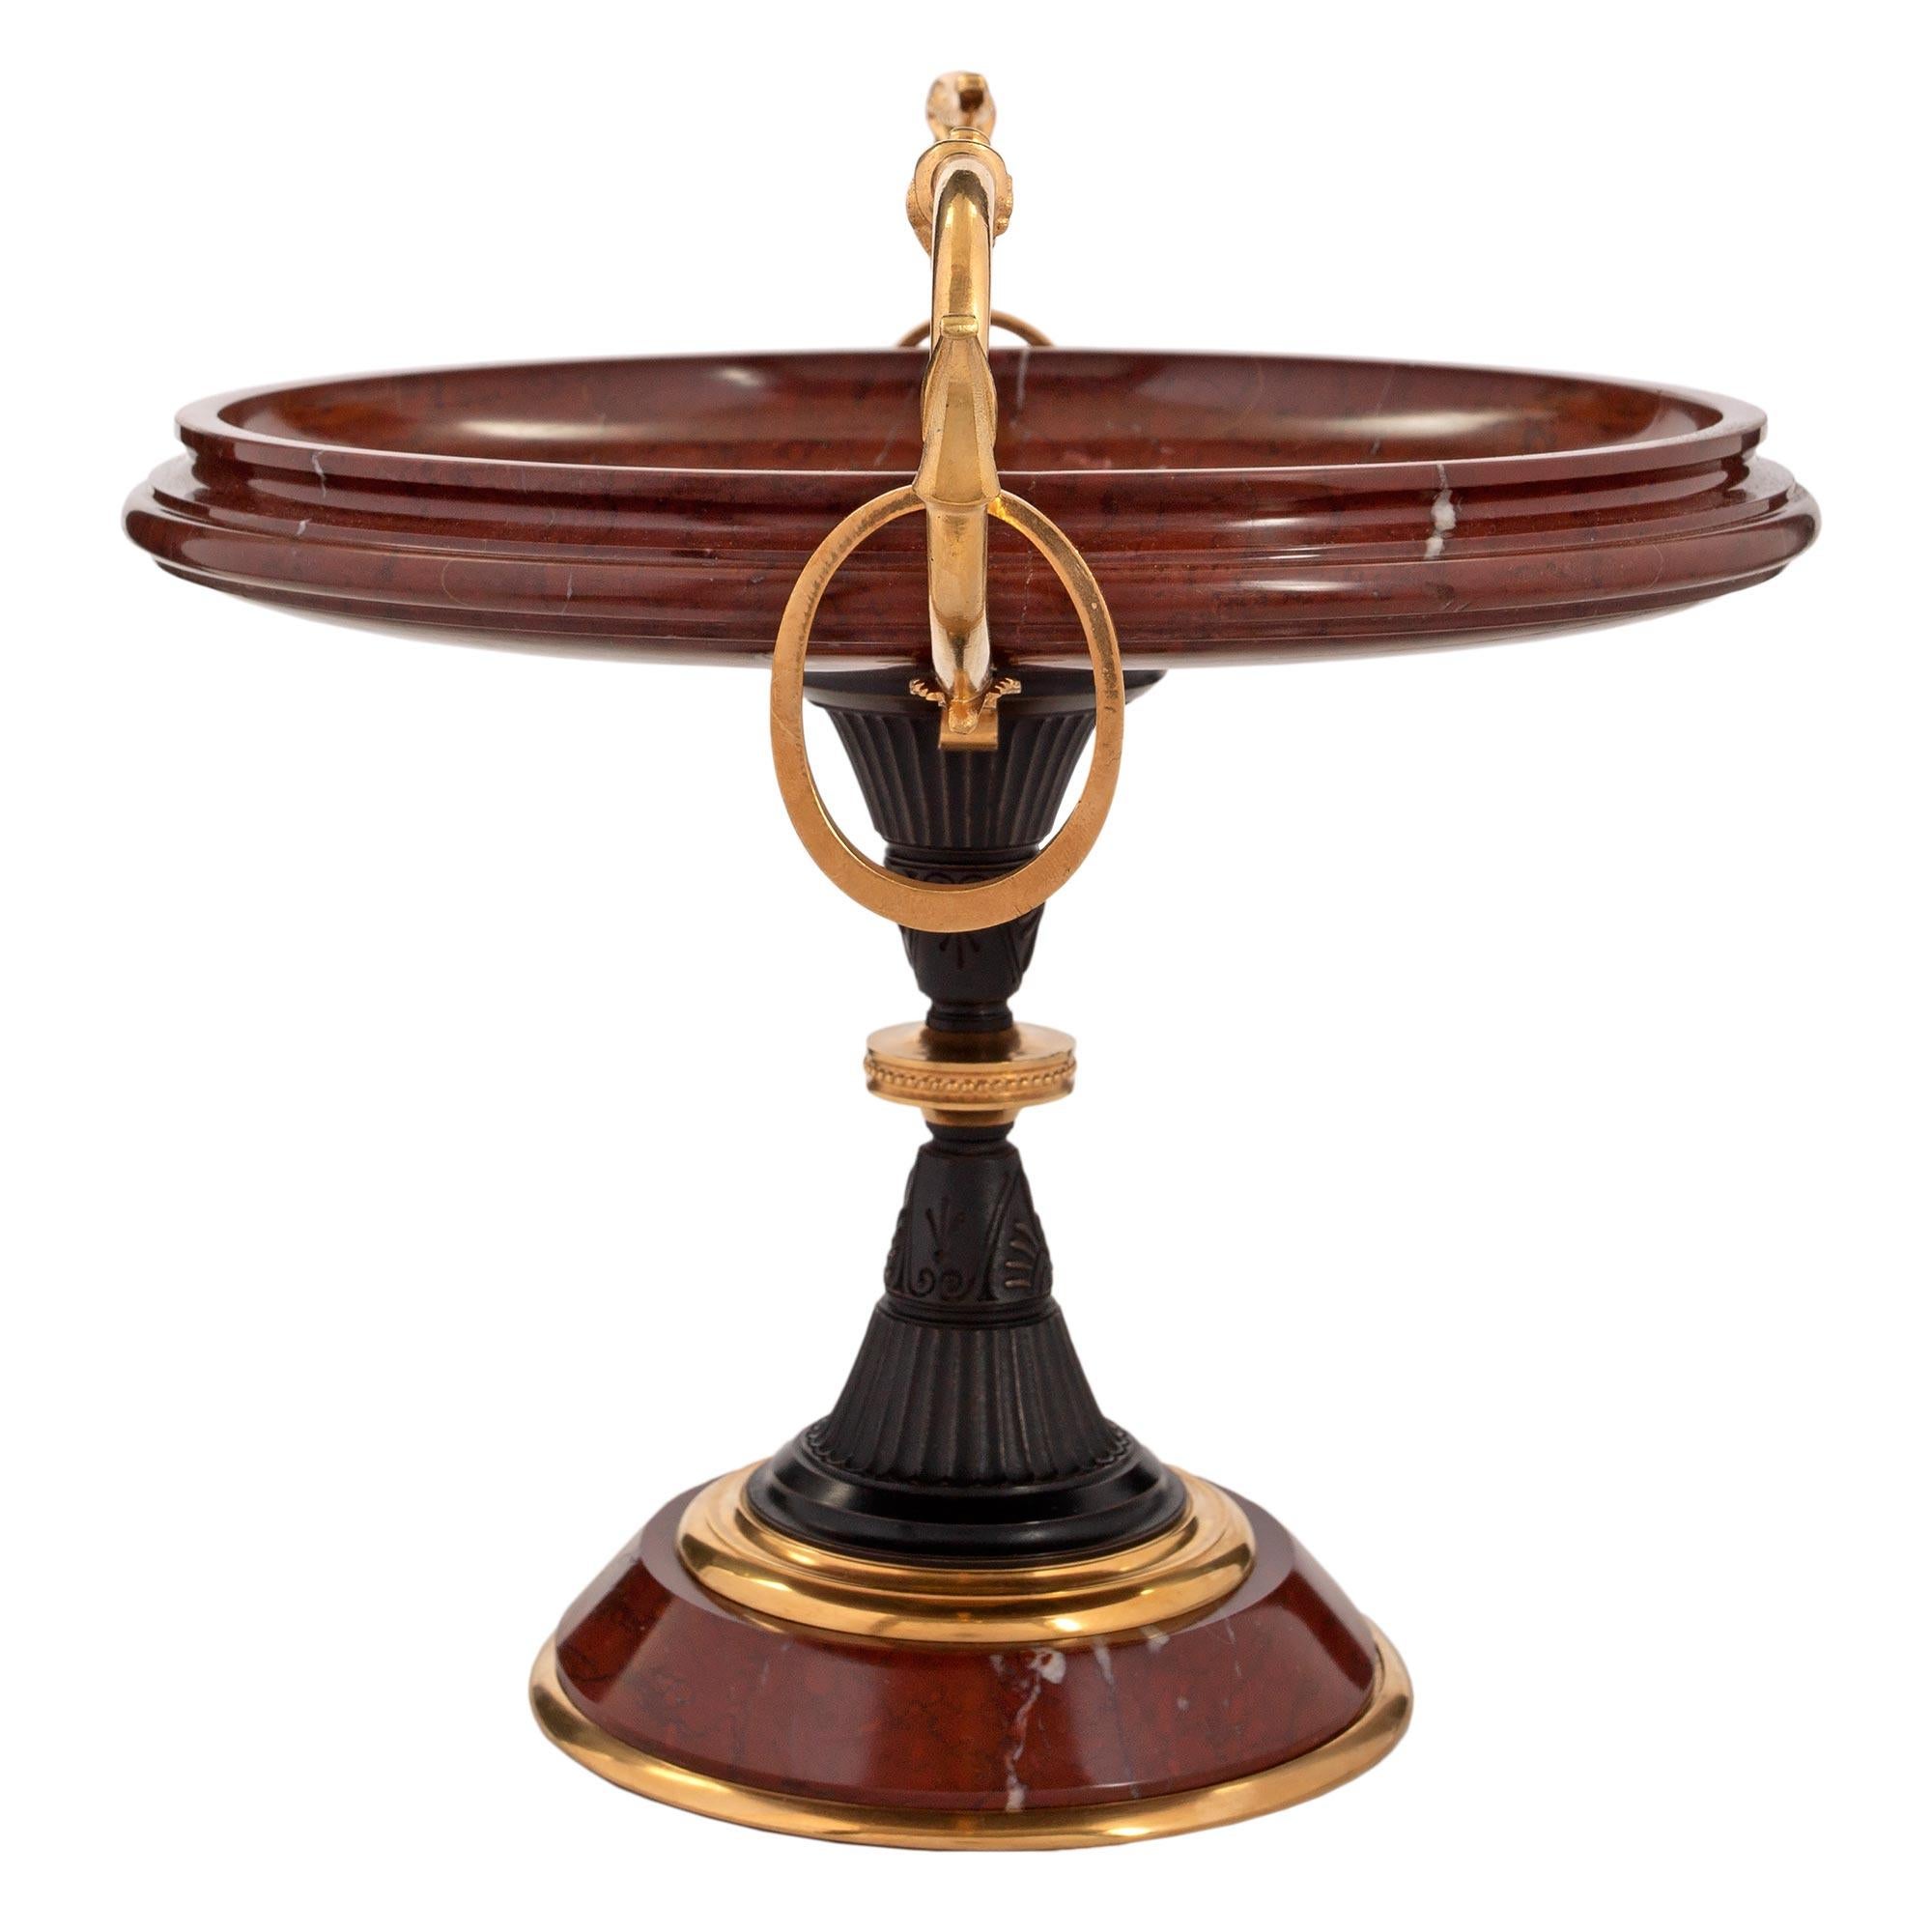 A very elegant French 19th century Renaissance st. Rouge Antique marble, ormolu and patinated bronze tazza. The tazza is raised by a circular ormolu band below the tapered marble base. The central patinated bronze support has fluted designs and